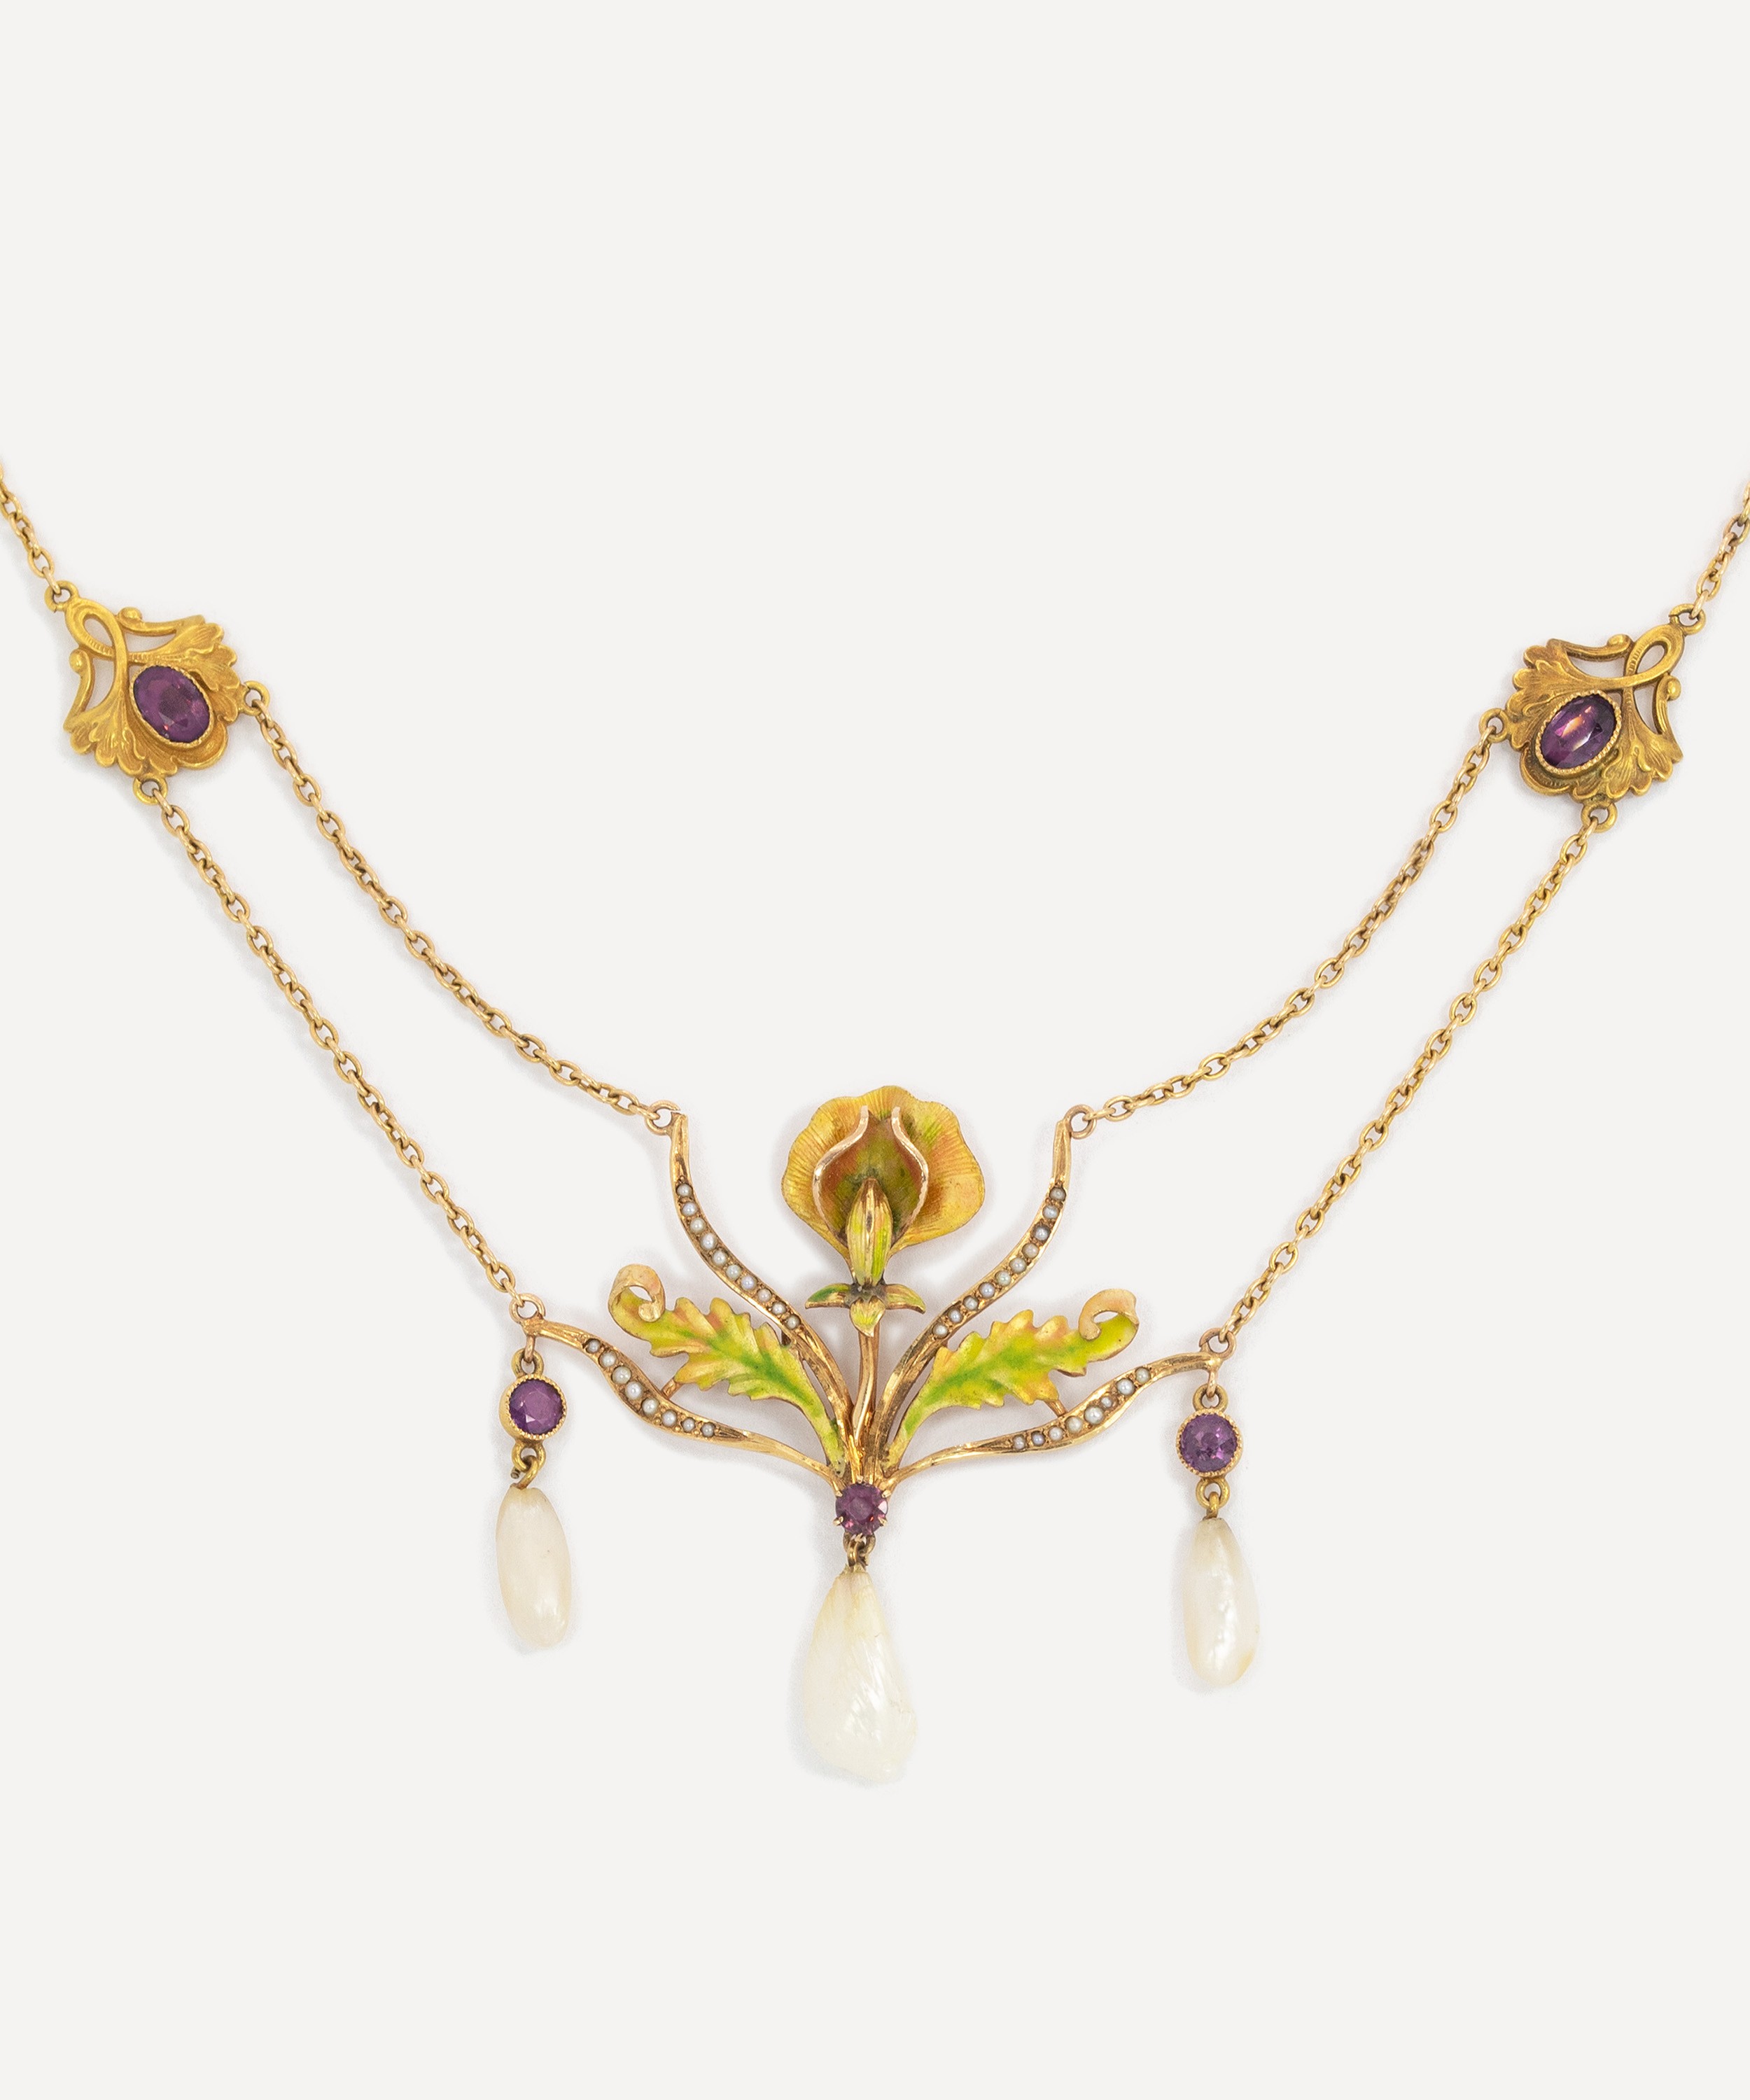 Kojis - 14ct Gold Art Nouveau Pearl and Amethyst Necklace image number 0